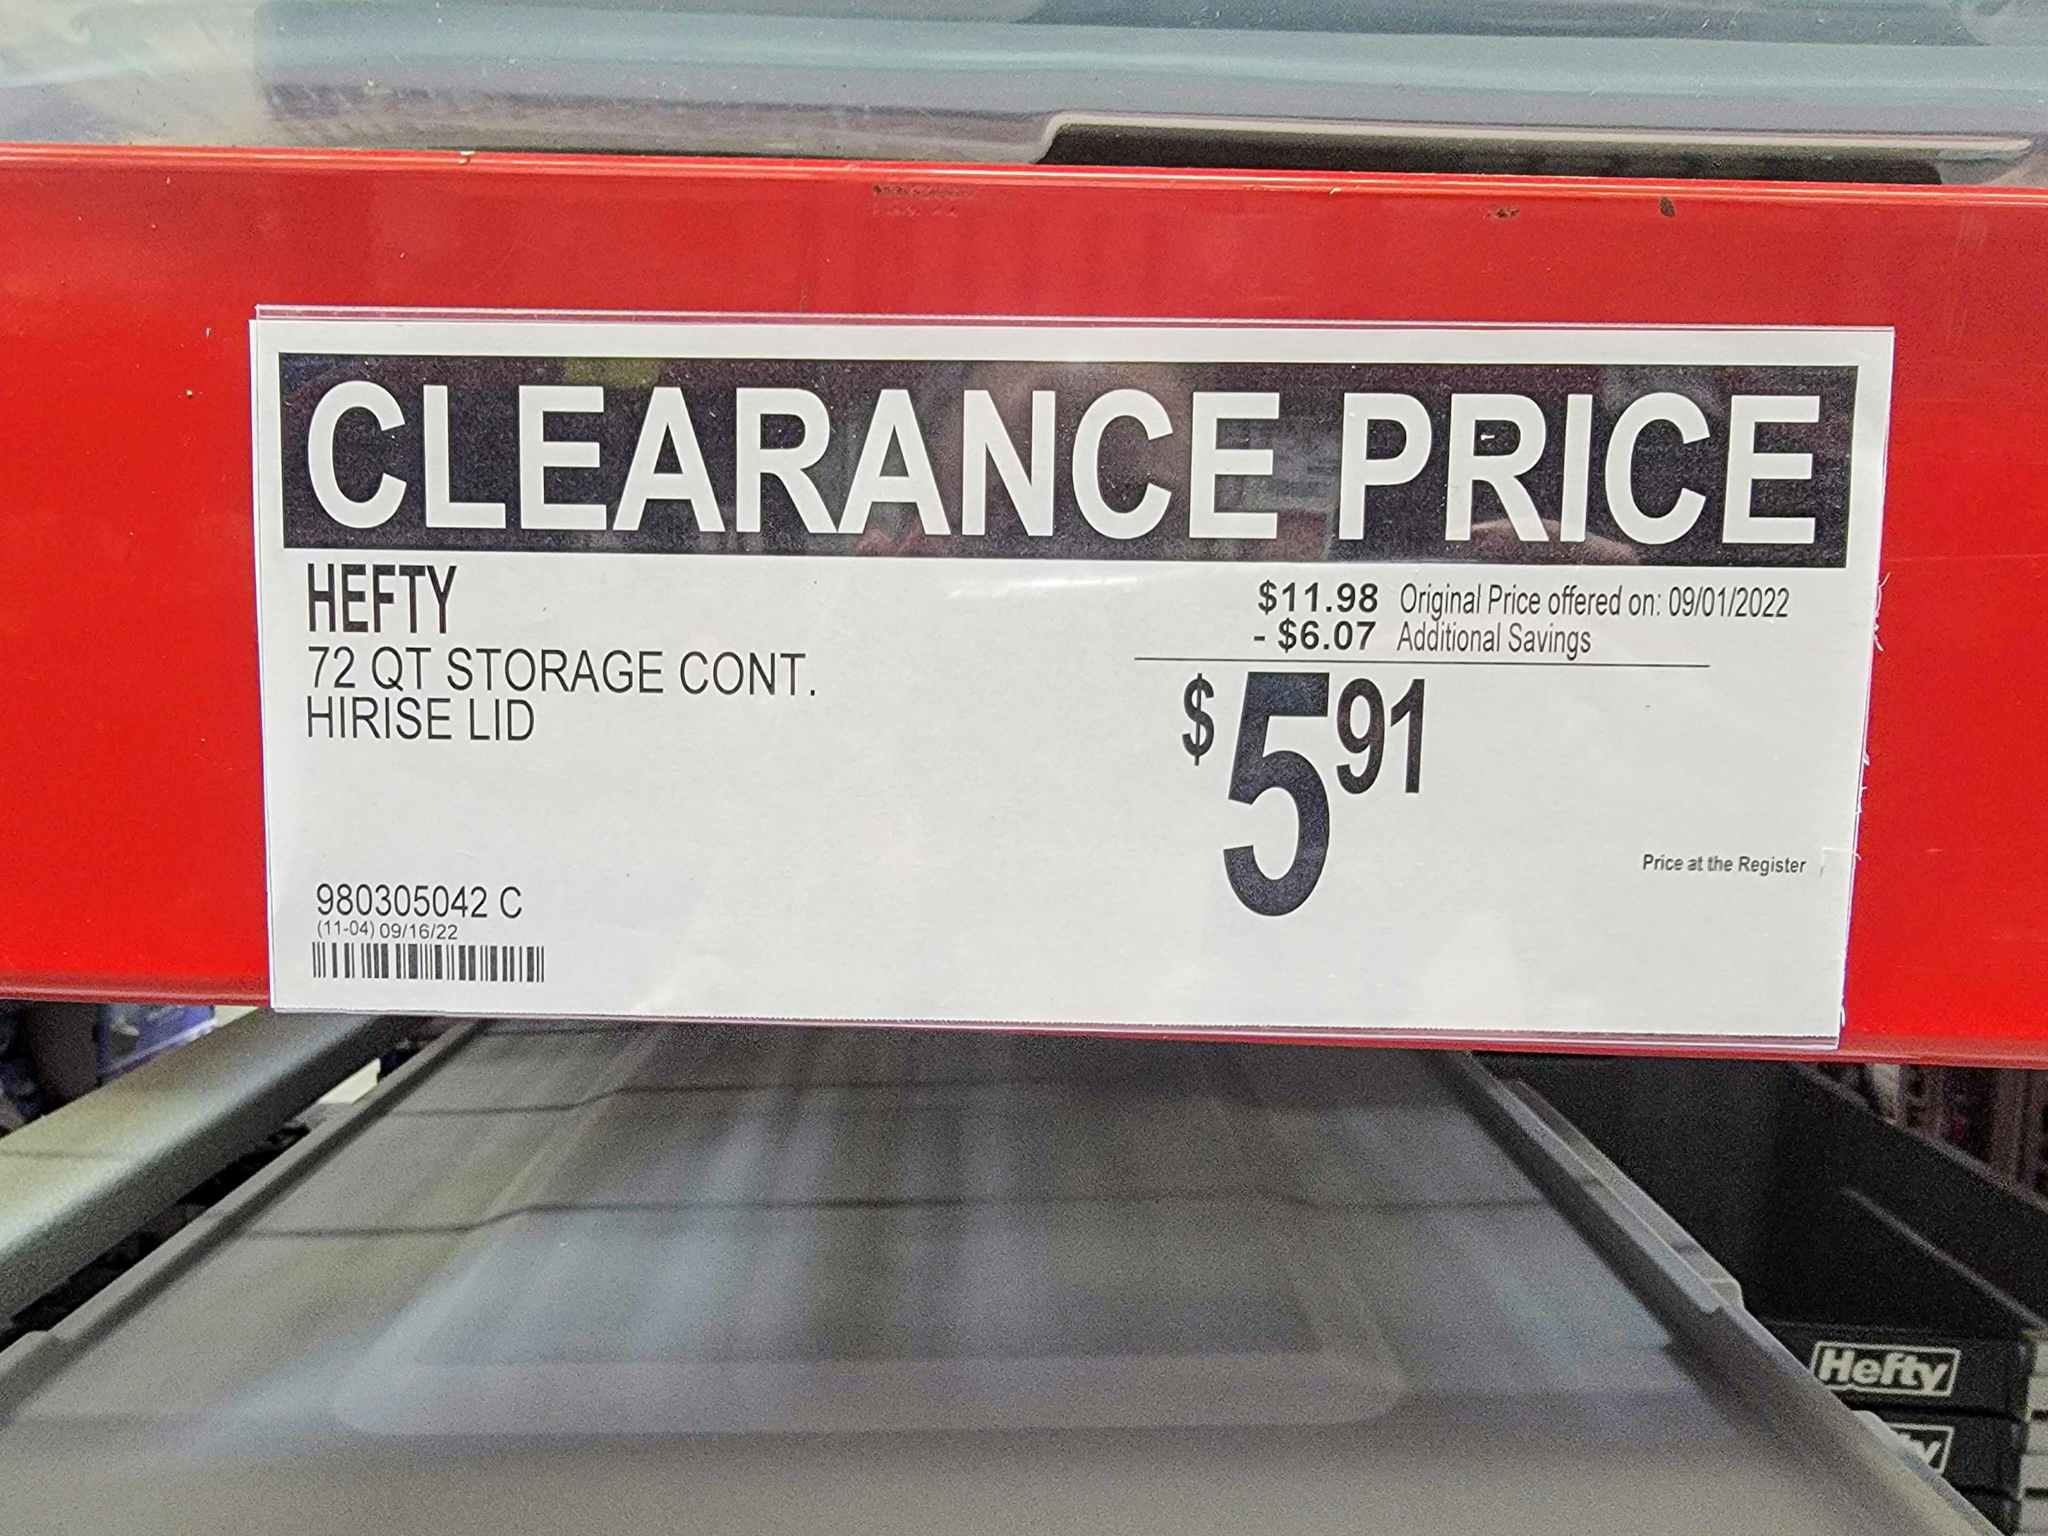 clearance sign for 72 quart storage tote for 5.91 hefty brand